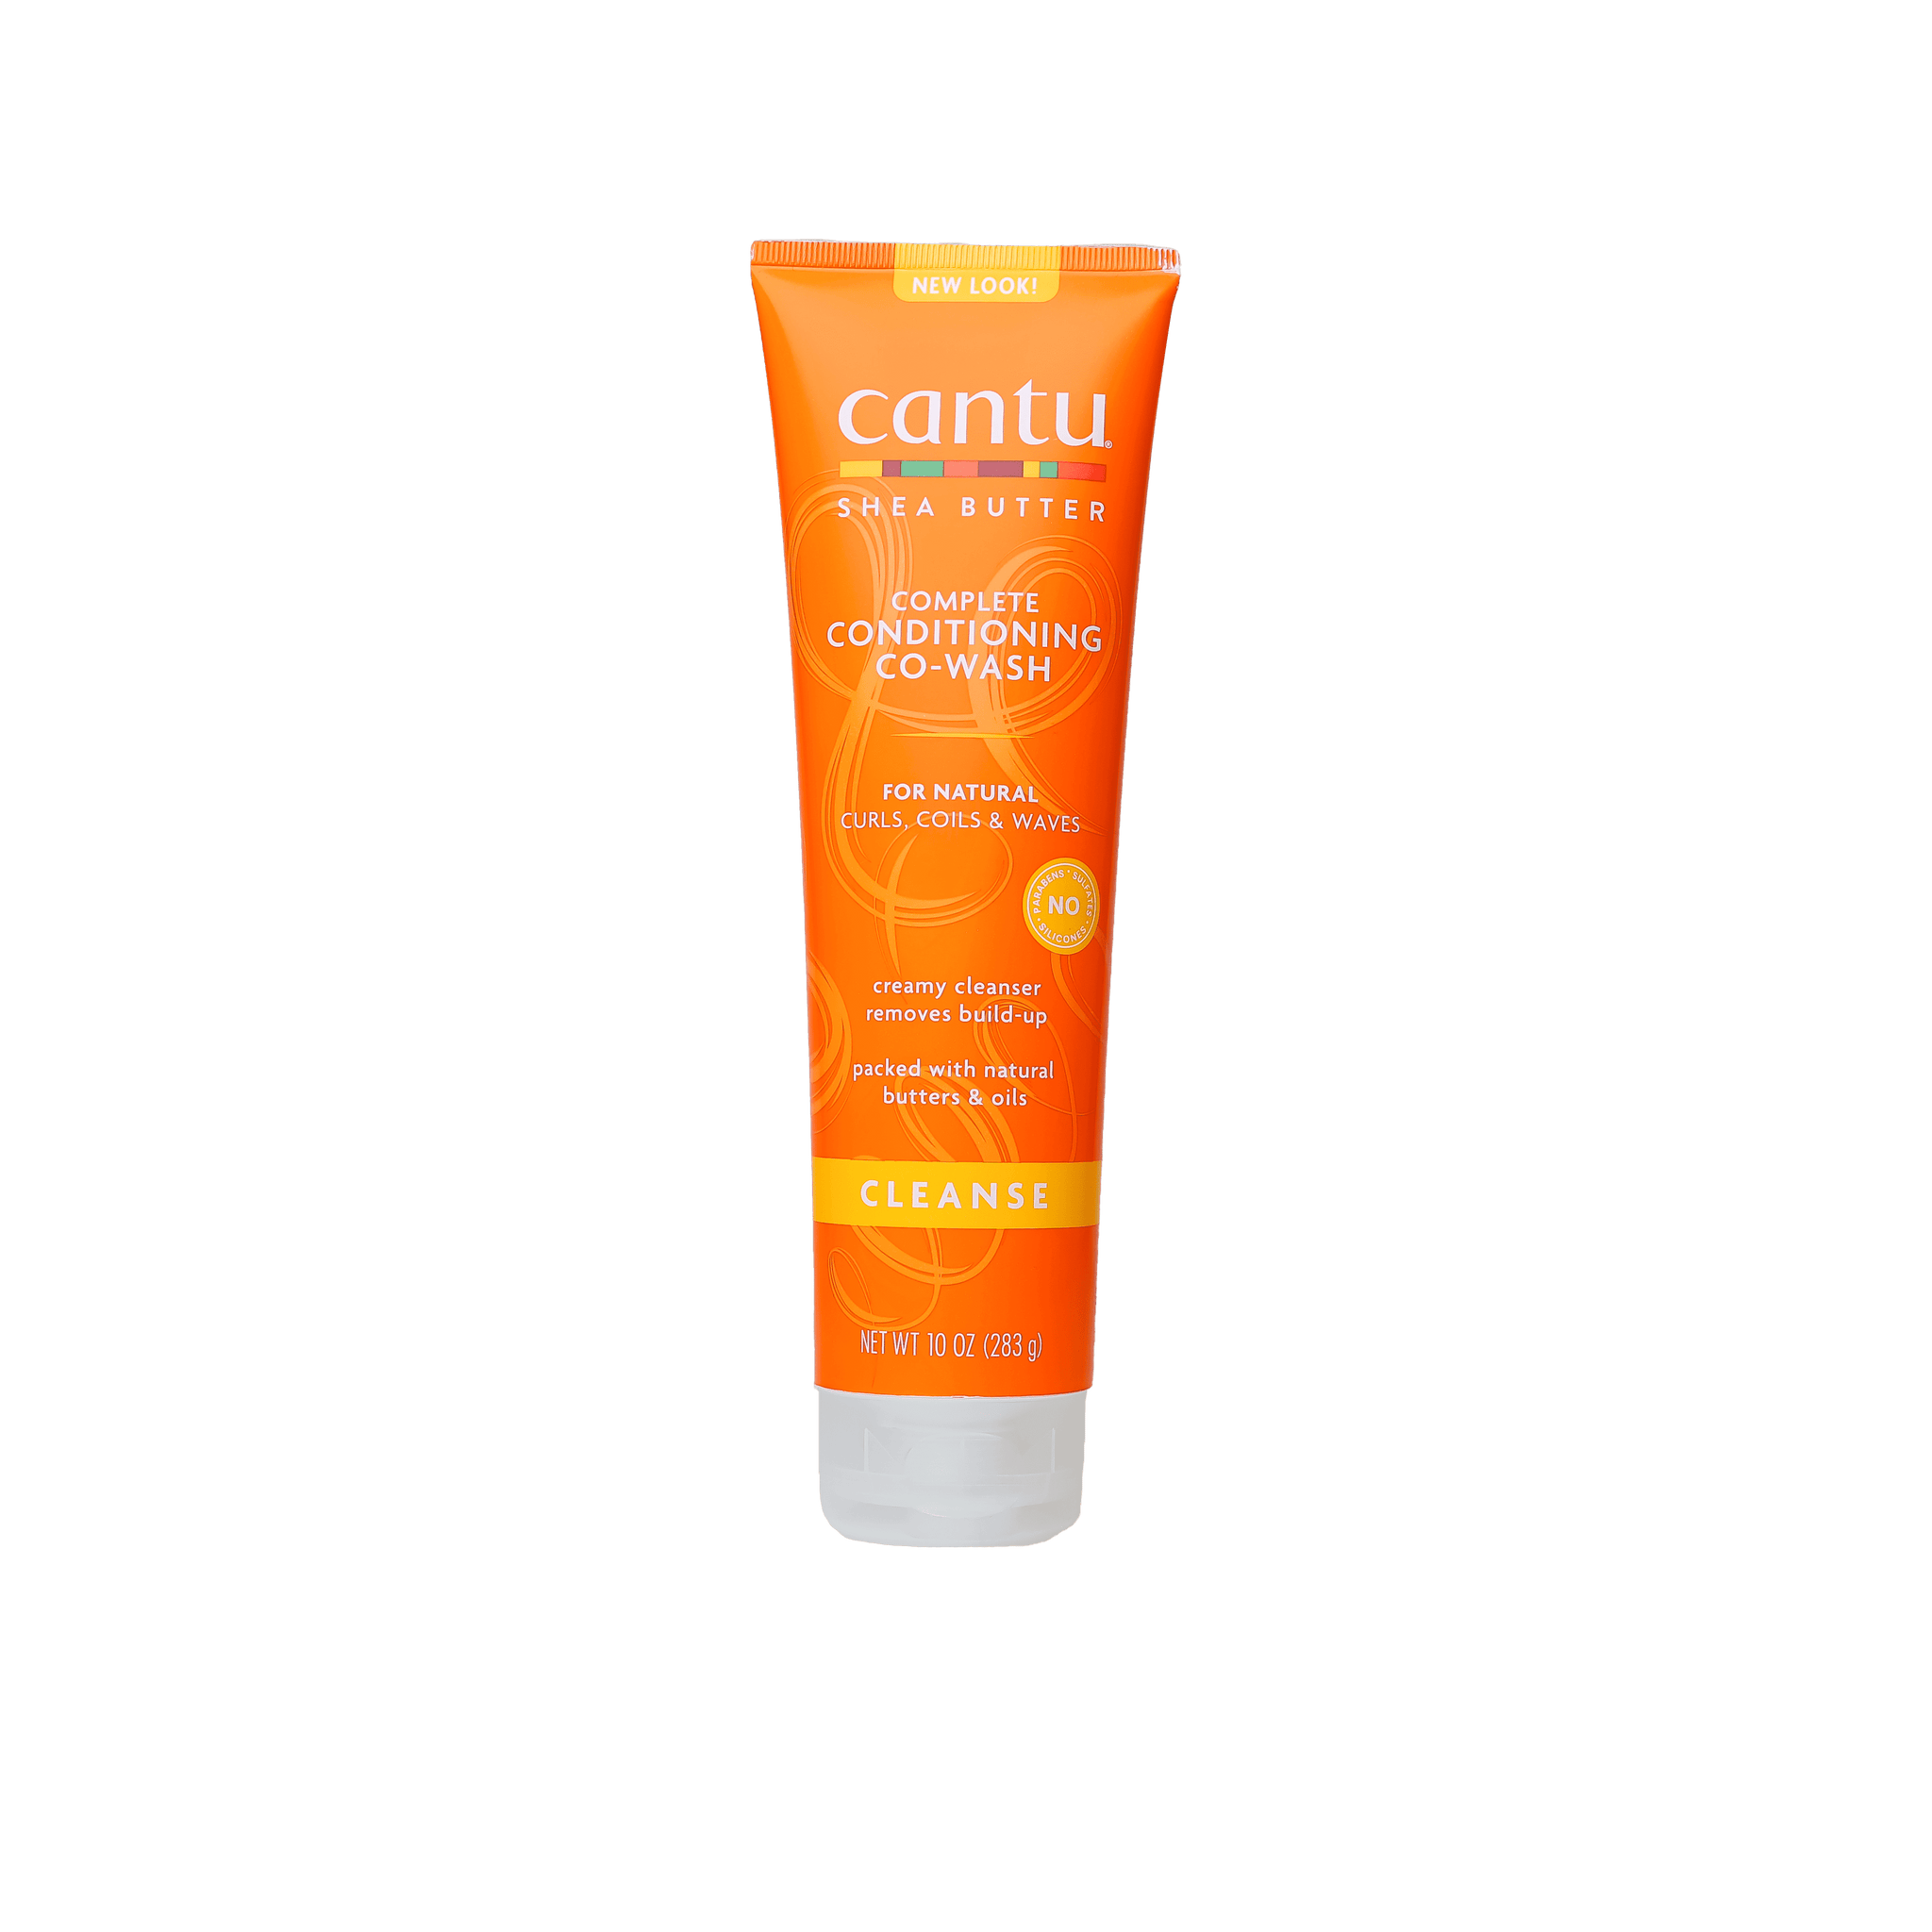 Cantu Complete Conditioning Co-Wash 283 G - Mrayti Store